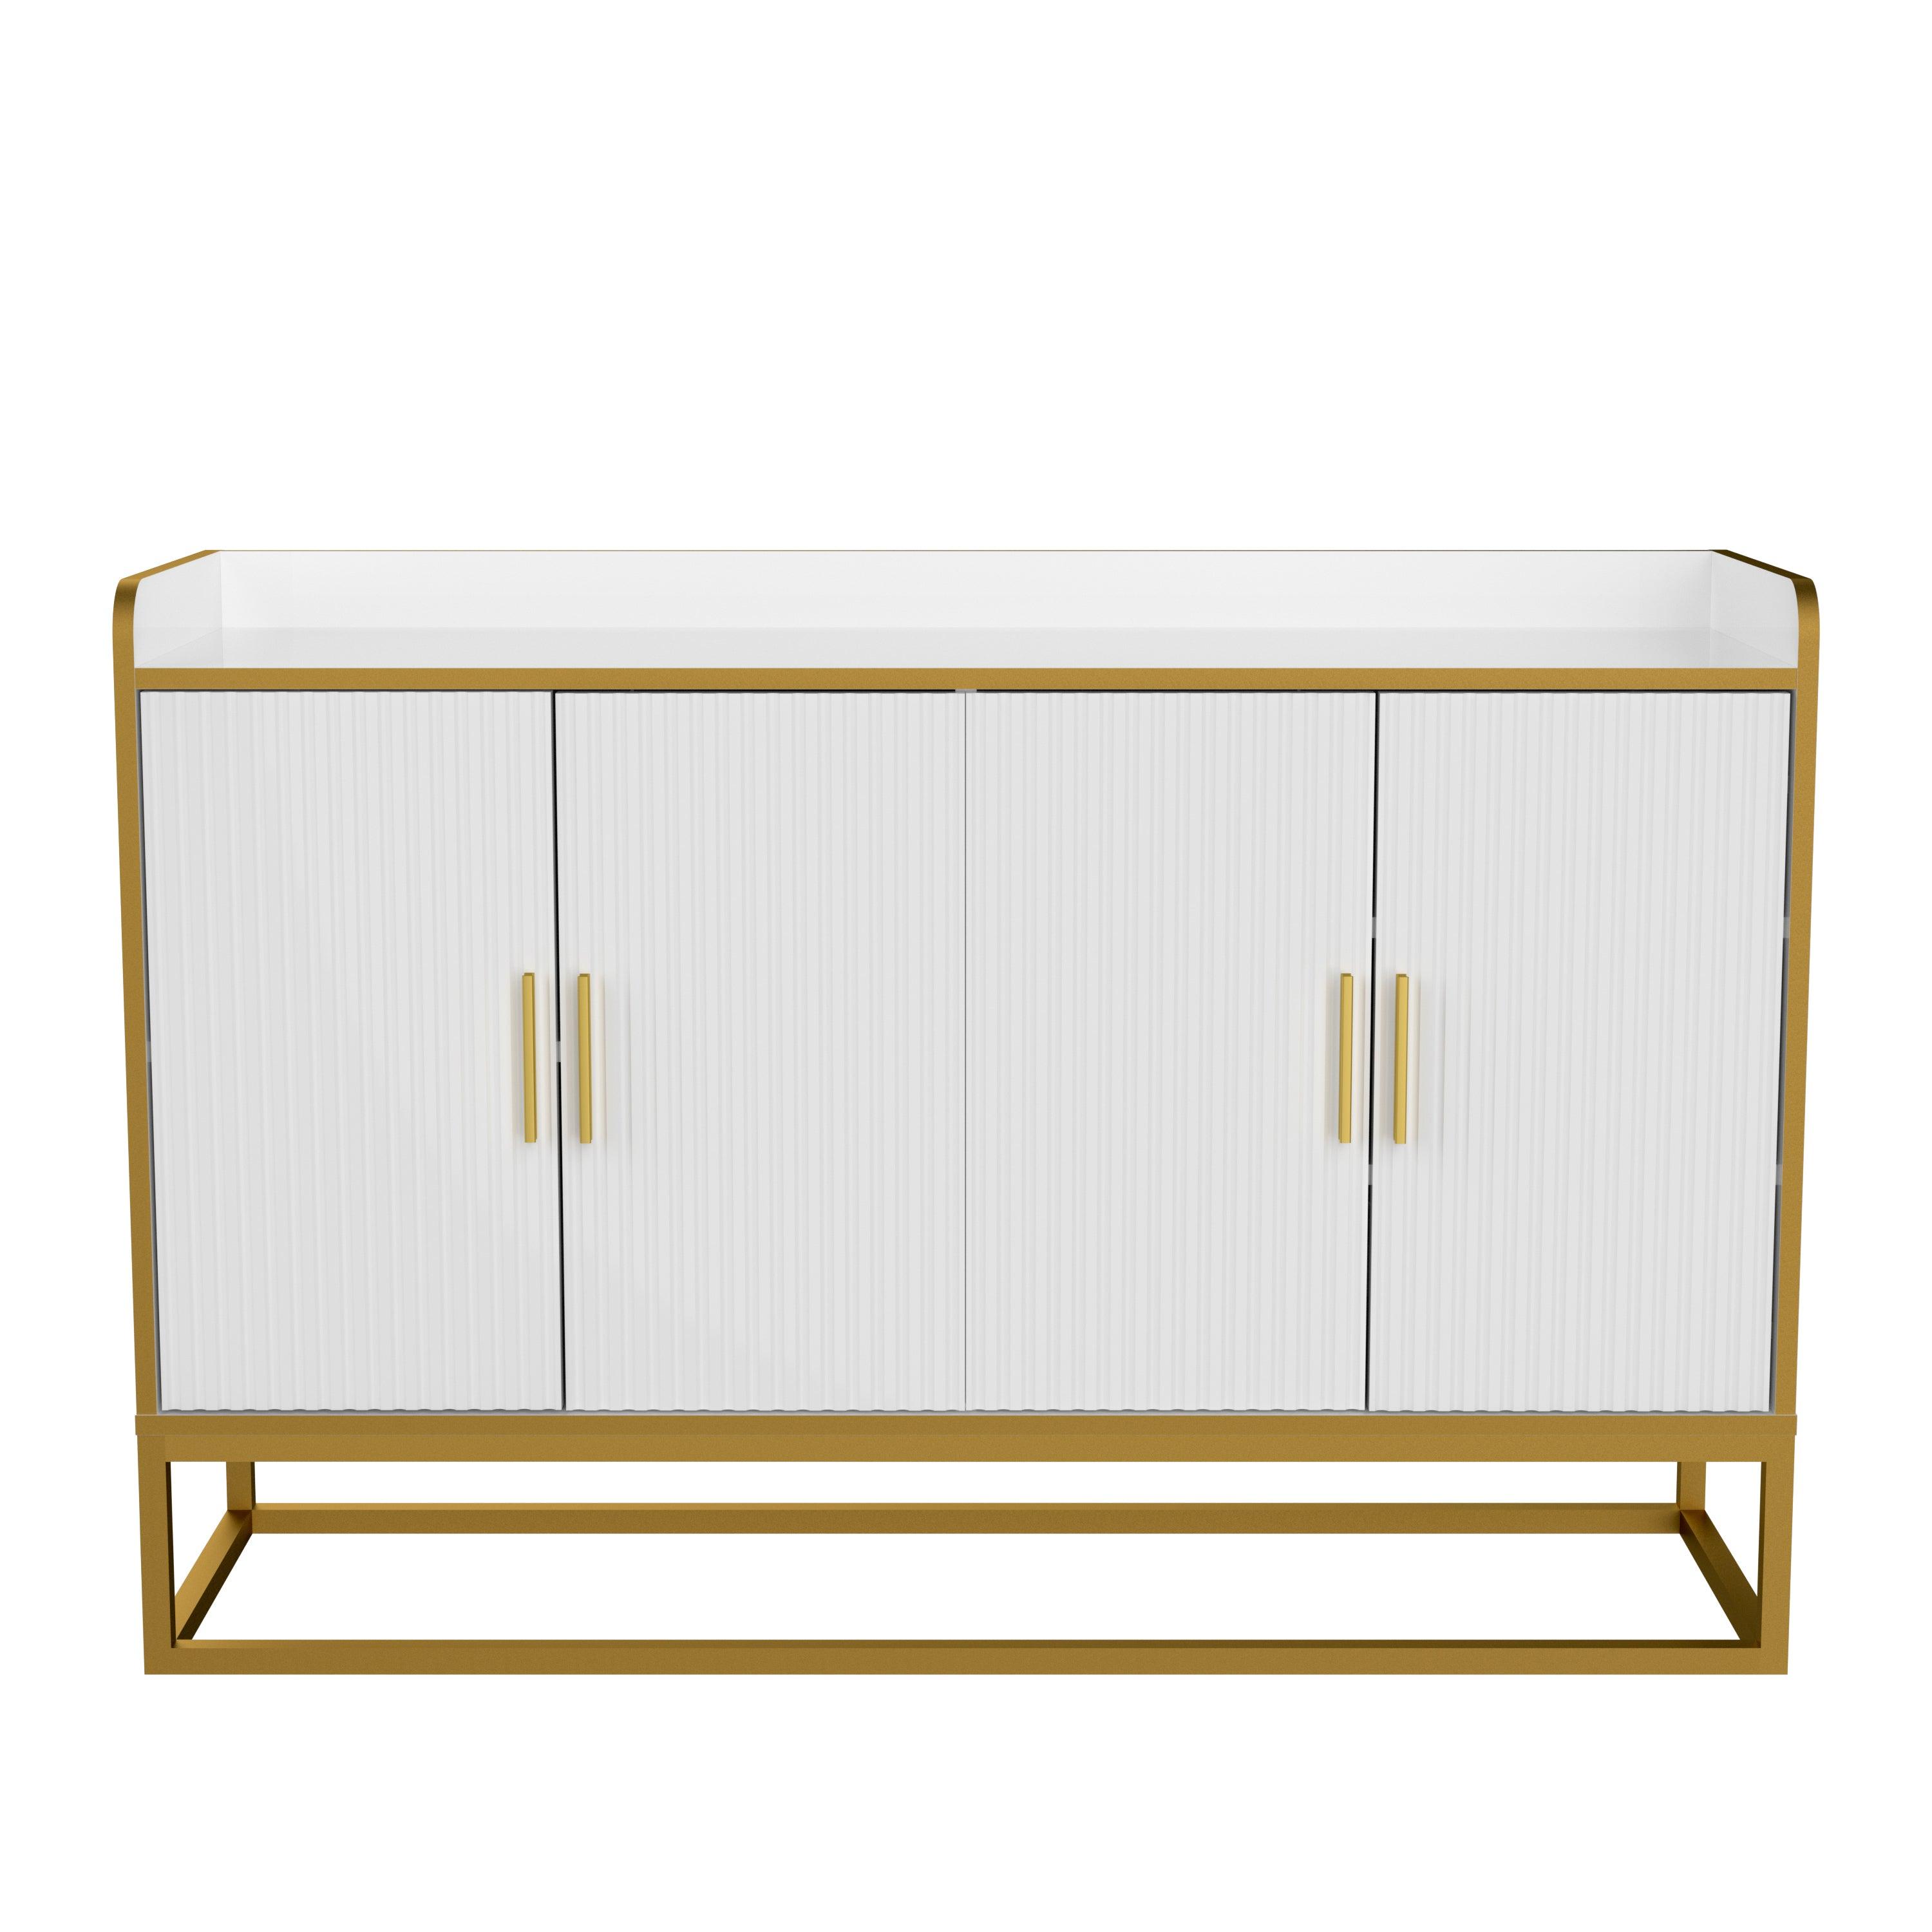 🆓🚛 Modern Kitchen Buffet Storage Cabinet Cupboard White Gloss With Metal Legs for Living Room Kitchen